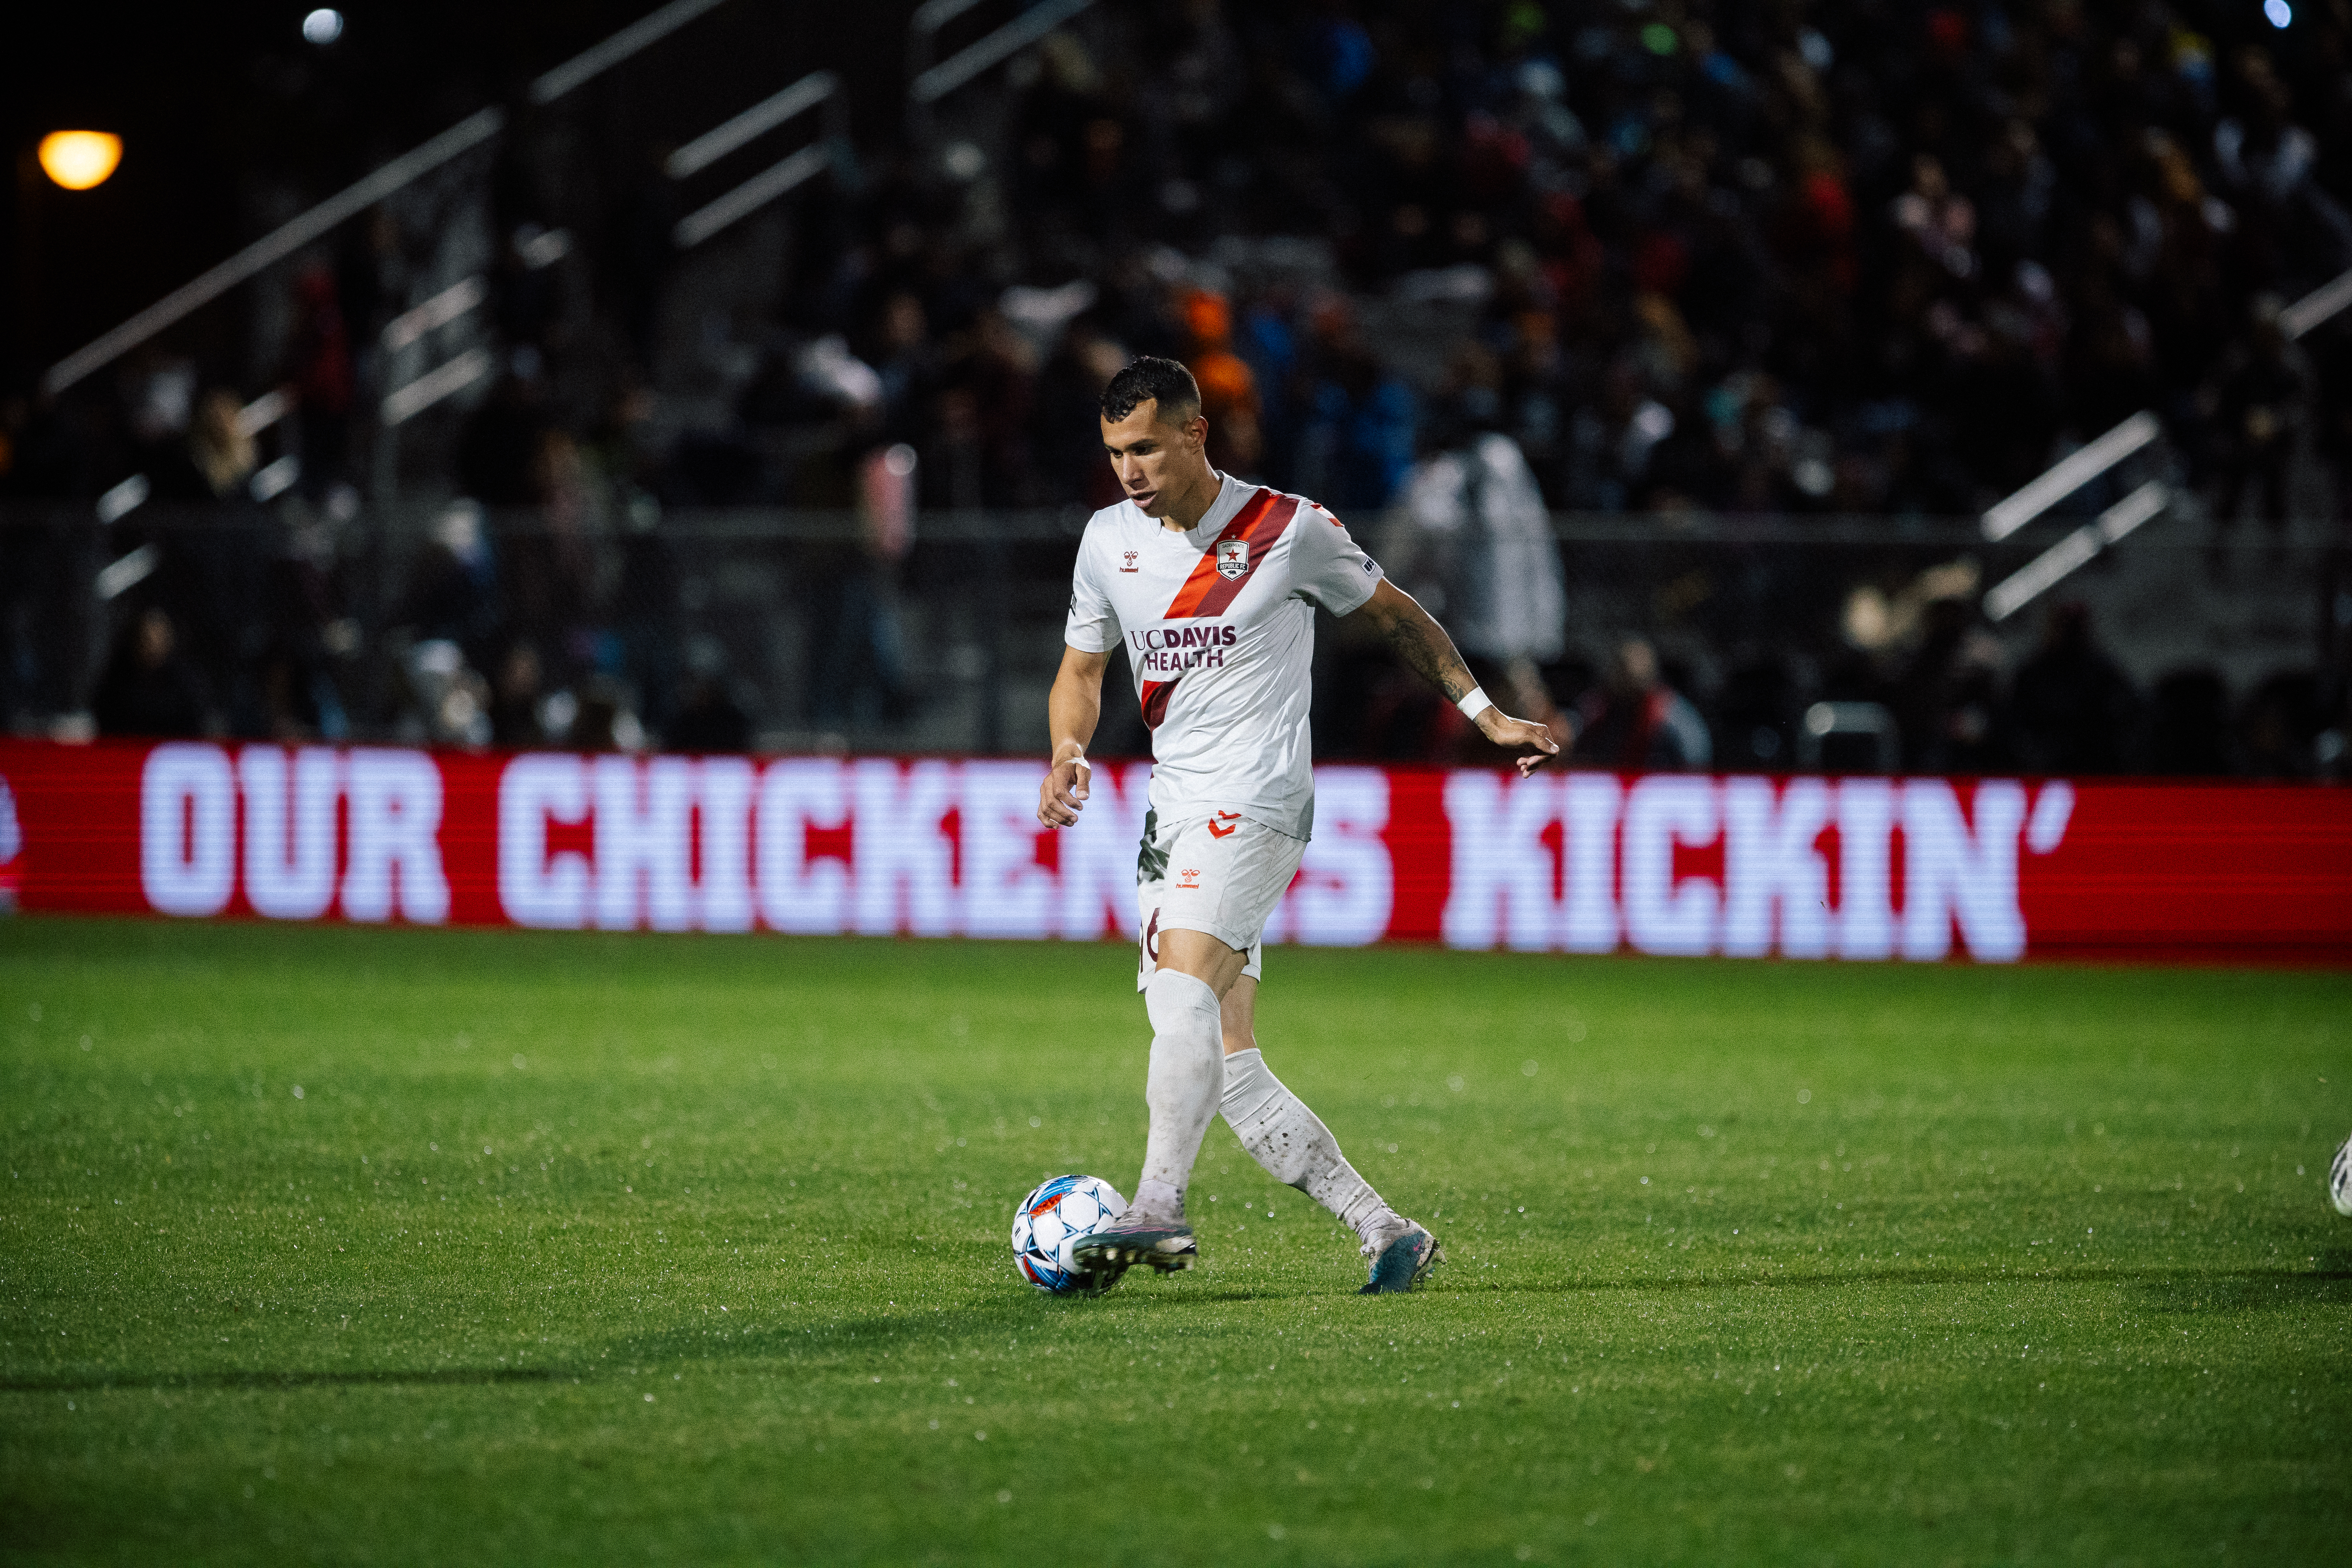 Match Preview: Republic FC v Orange County SC featured image